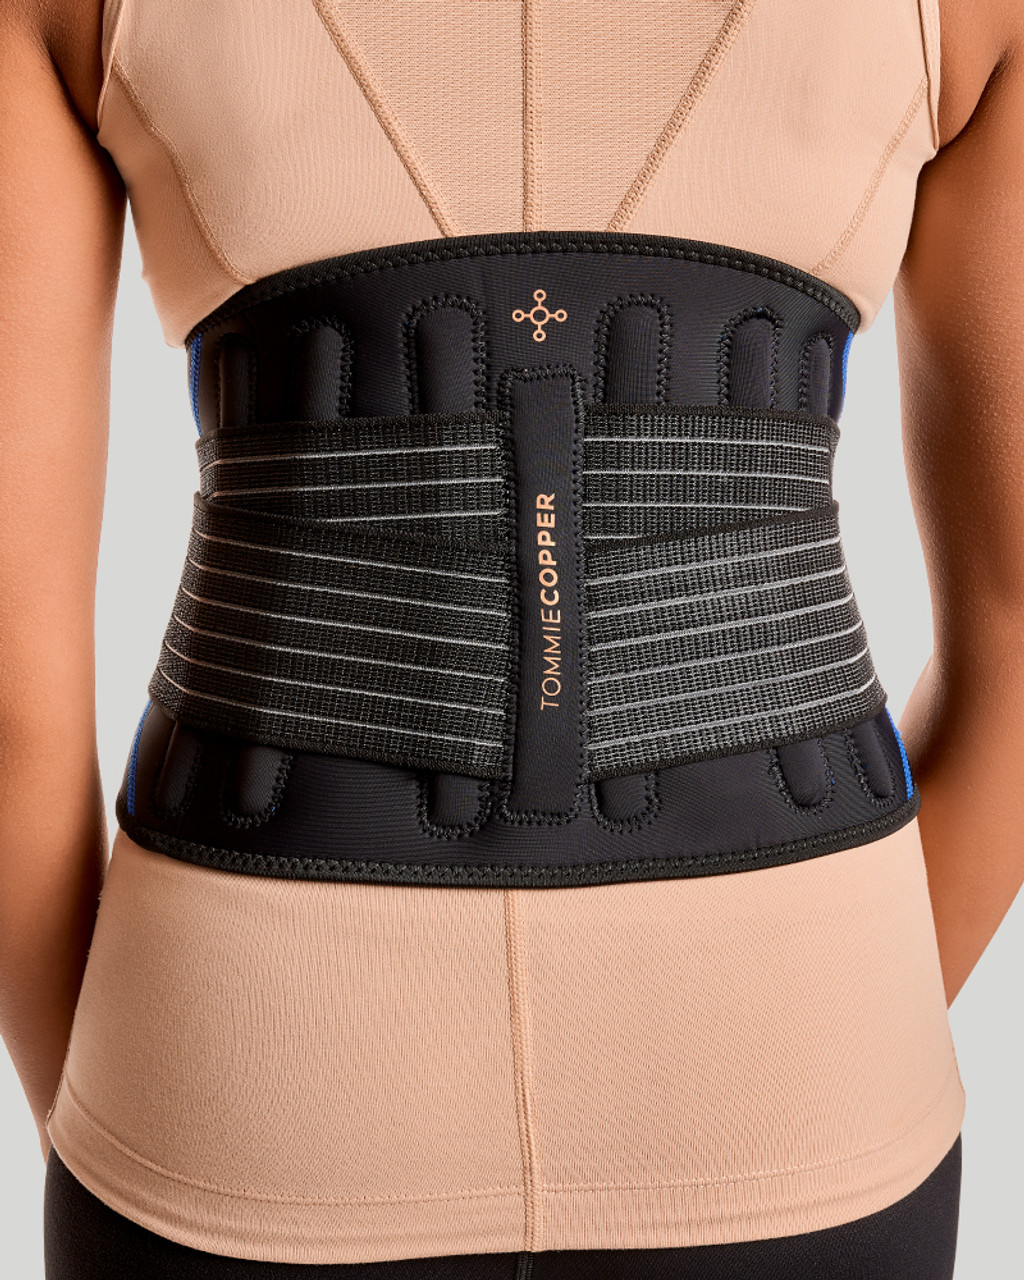 Tommie Copper Large/X-Large Women's Back Brace 1820WR010103 - The Home Depot